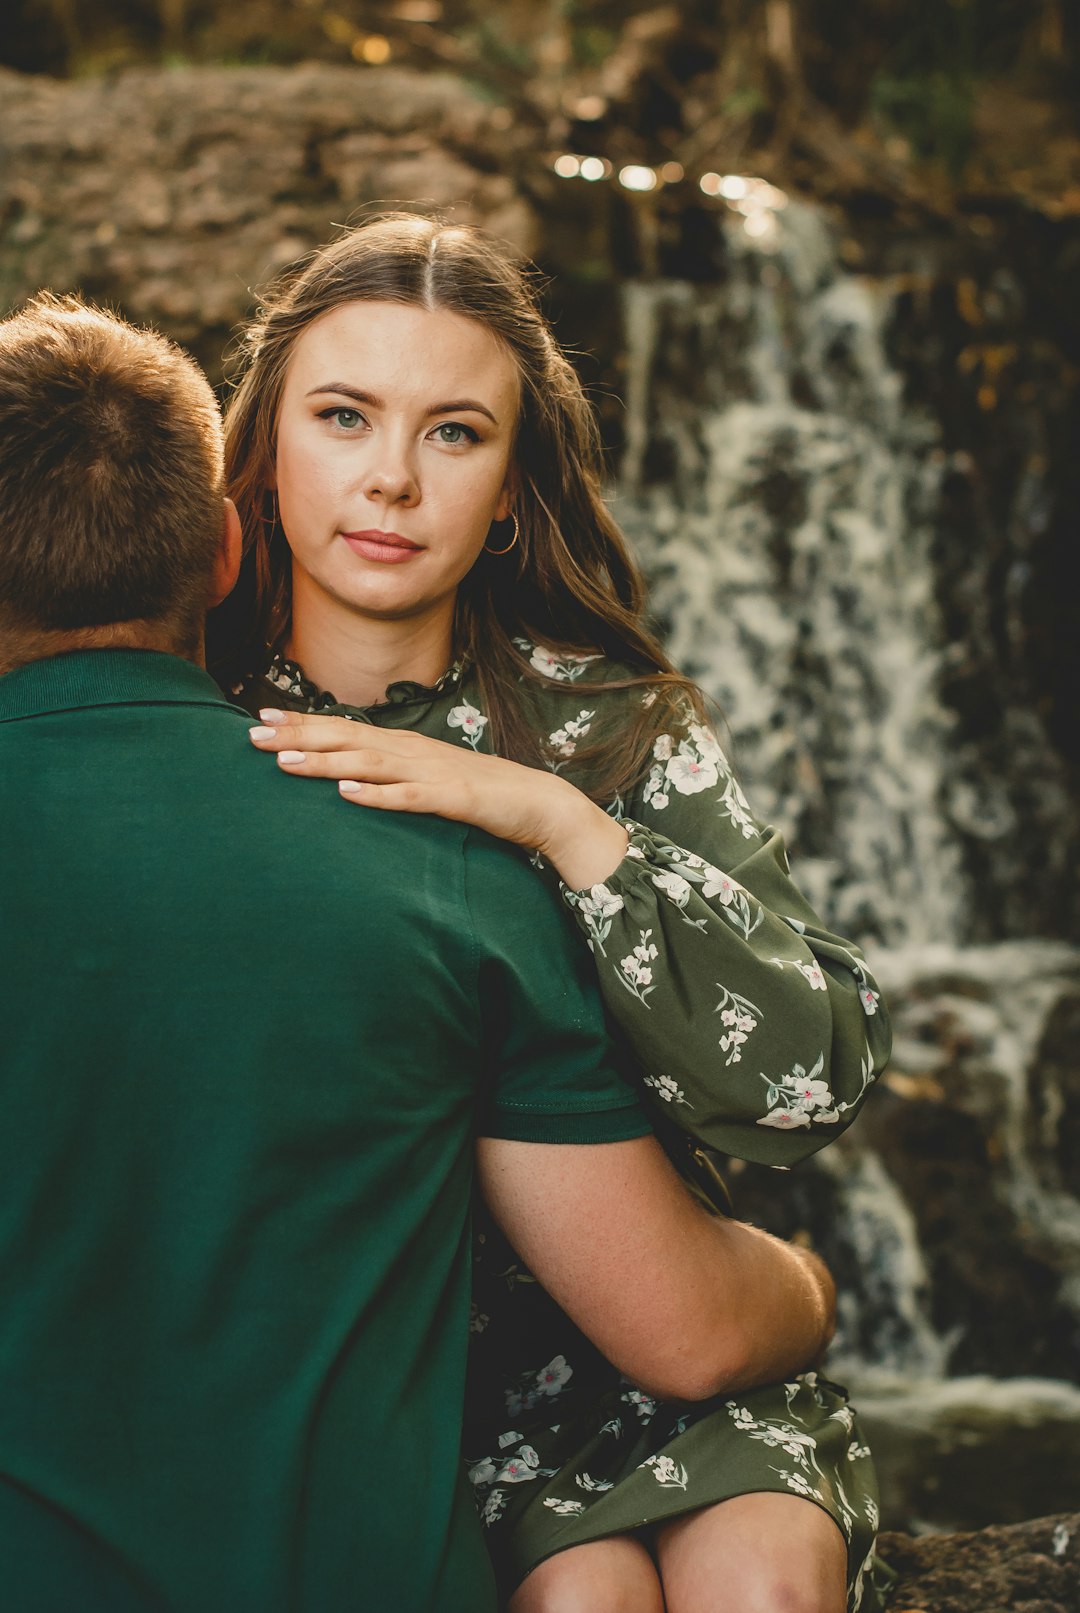 woman in green and brown floral dress hugging man in green t-shirt